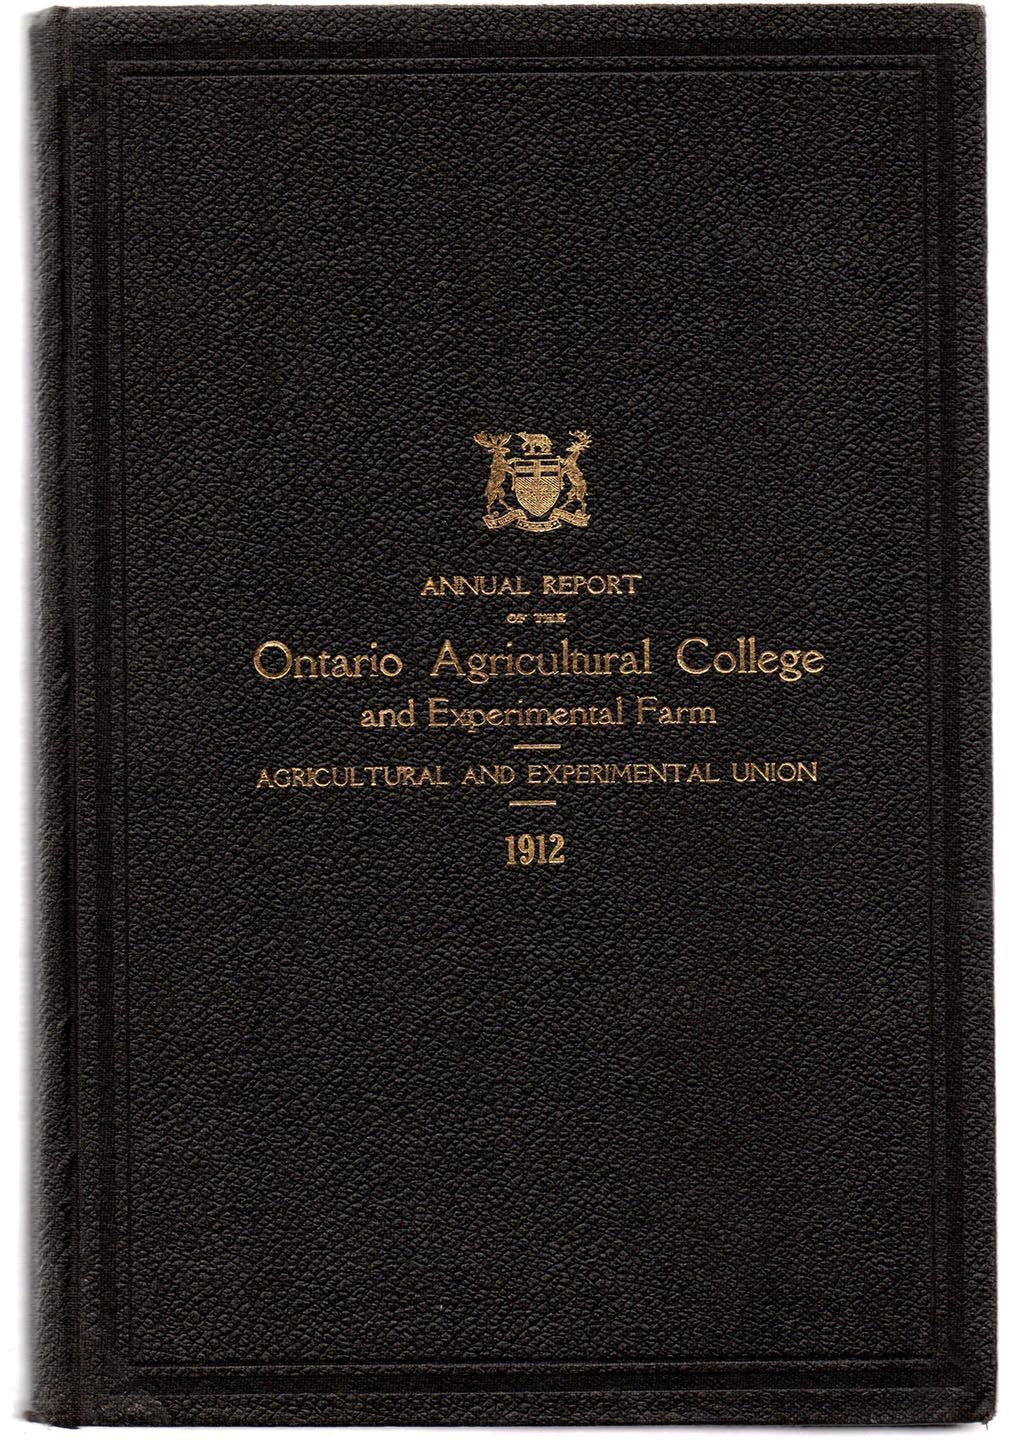 Thirty-eighth Annual Report of the Ontario Agricultural College and Experimental Farm 1912; Thirty-Fourth Annual Report of the Agricultural and Experimental Union 1912